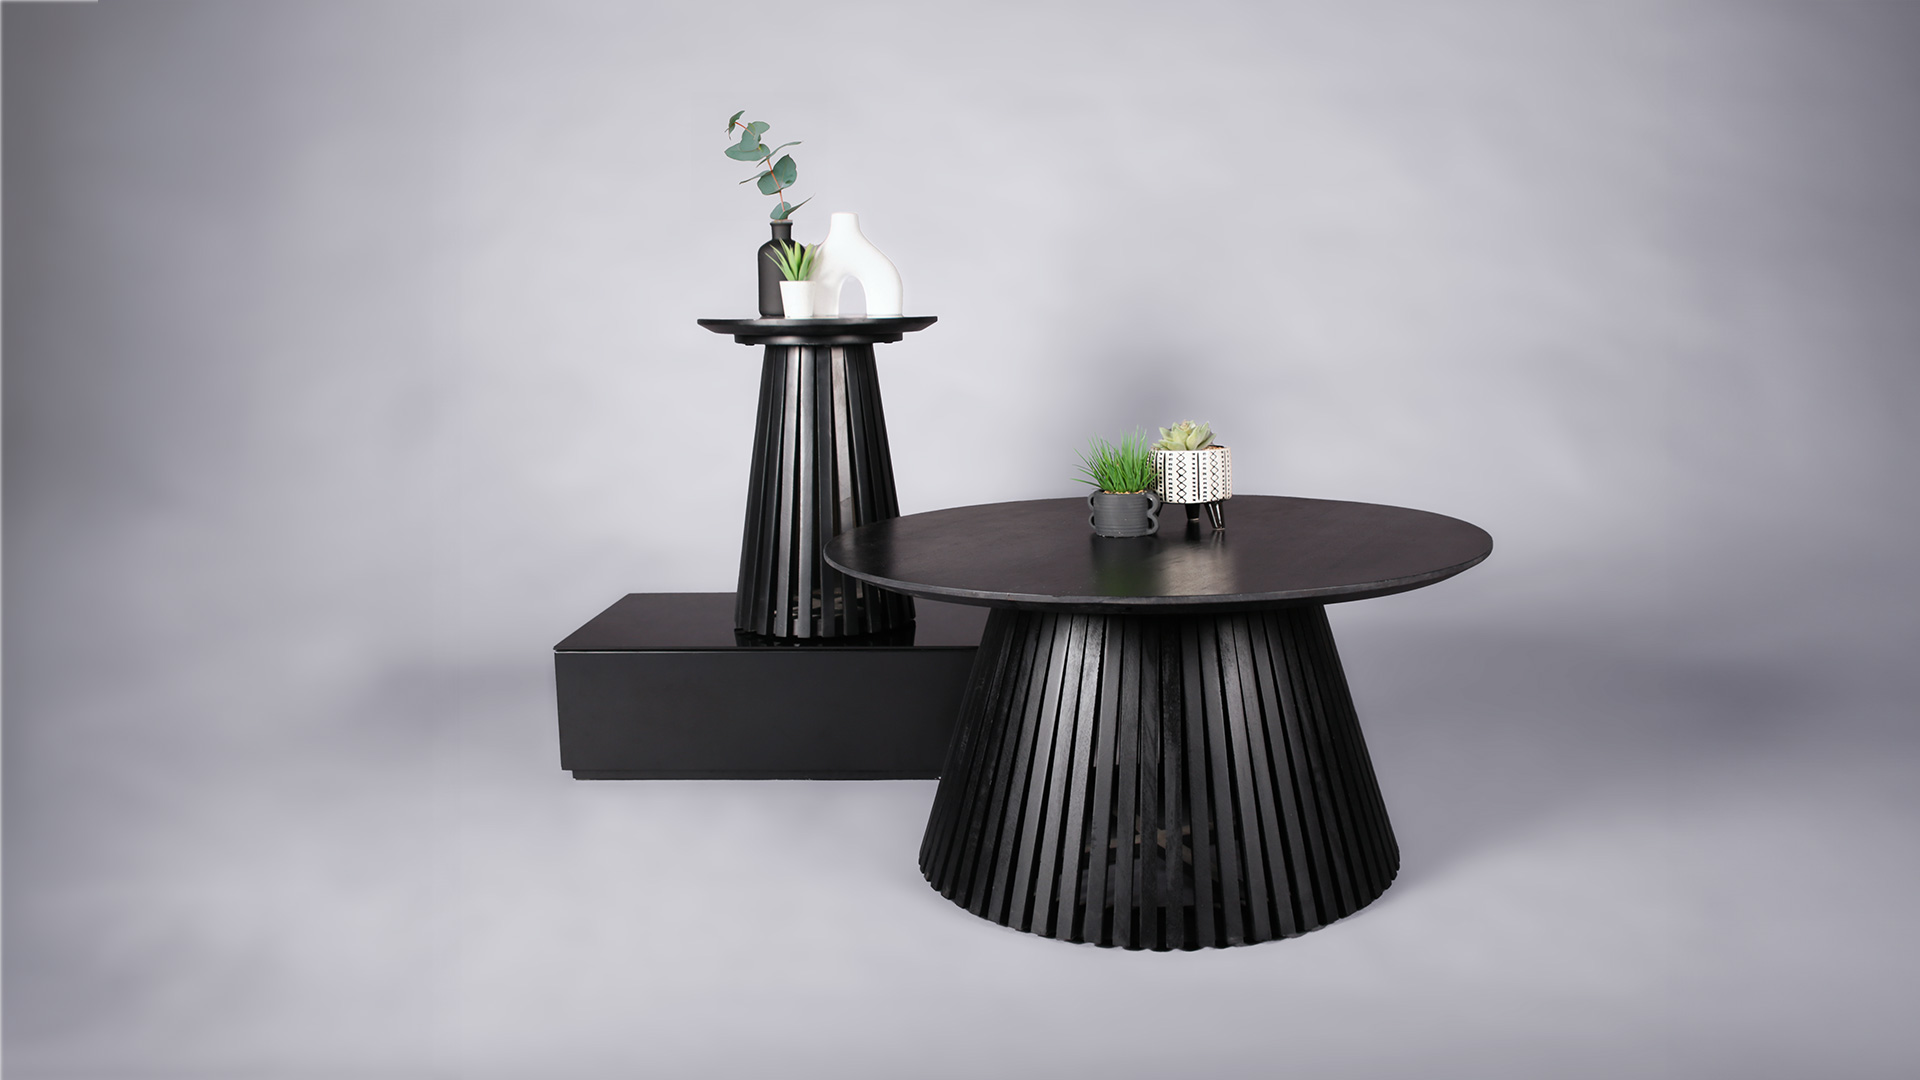 he Nara Coffee table in black perfectly blends Scandinavian functionality and Japanese design